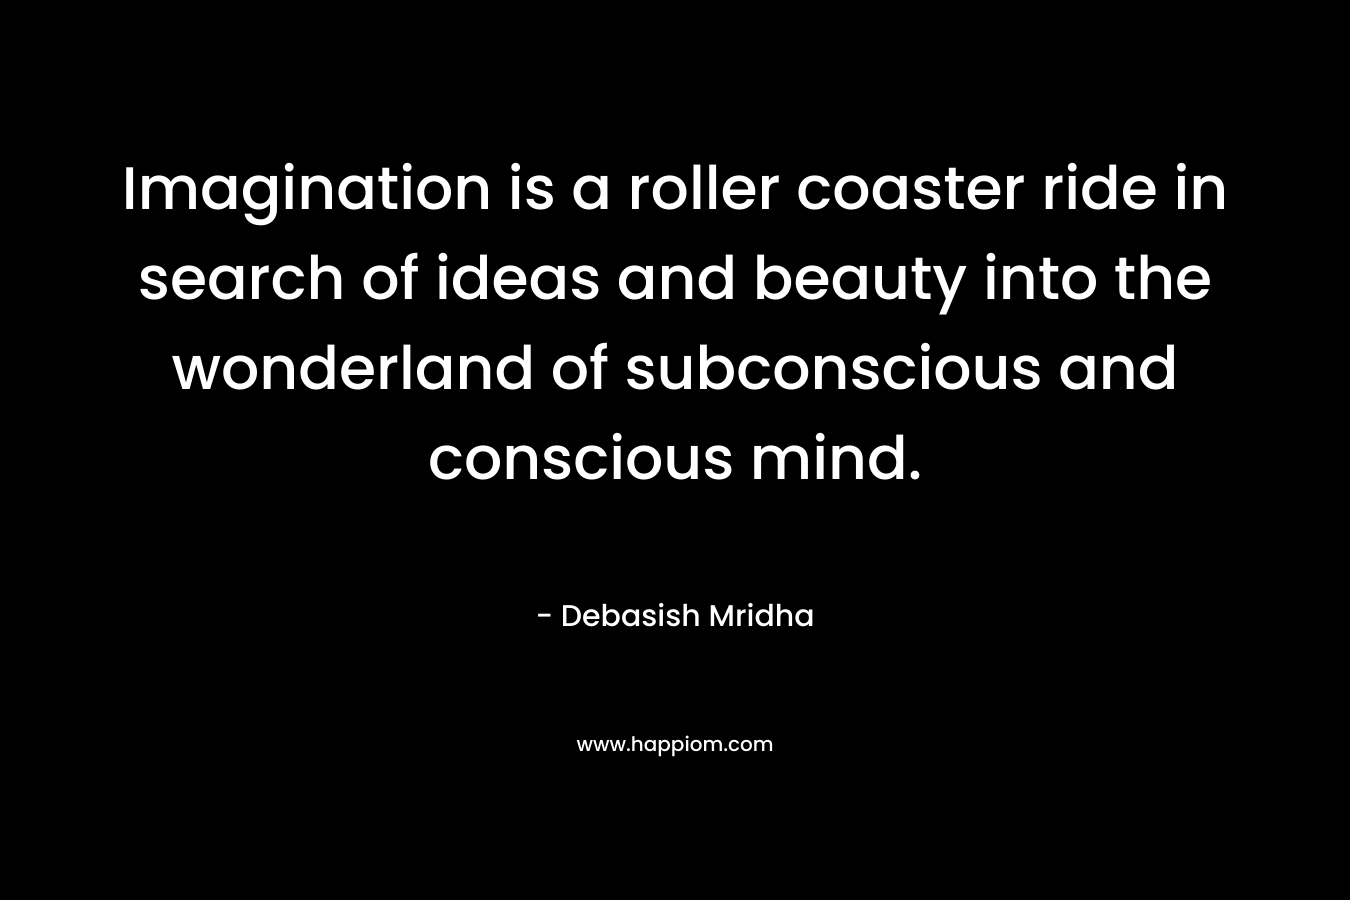 Imagination is a roller coaster ride in search of ideas and beauty into the wonderland of subconscious and conscious mind. – Debasish Mridha